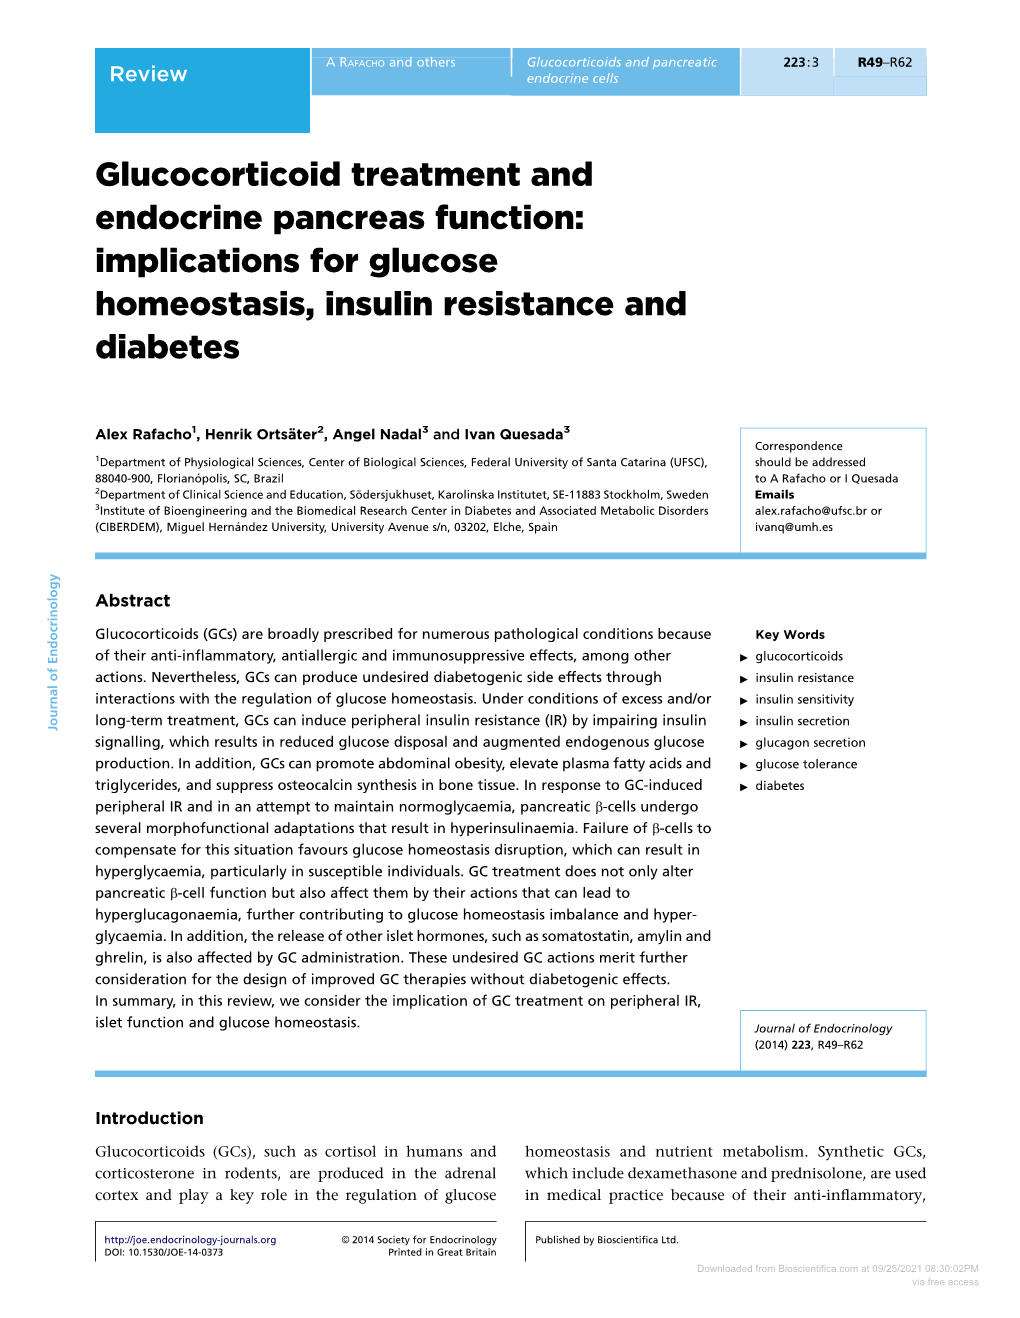 Implications for Glucose Homeostasis, Insulin Resistance and Diabetes